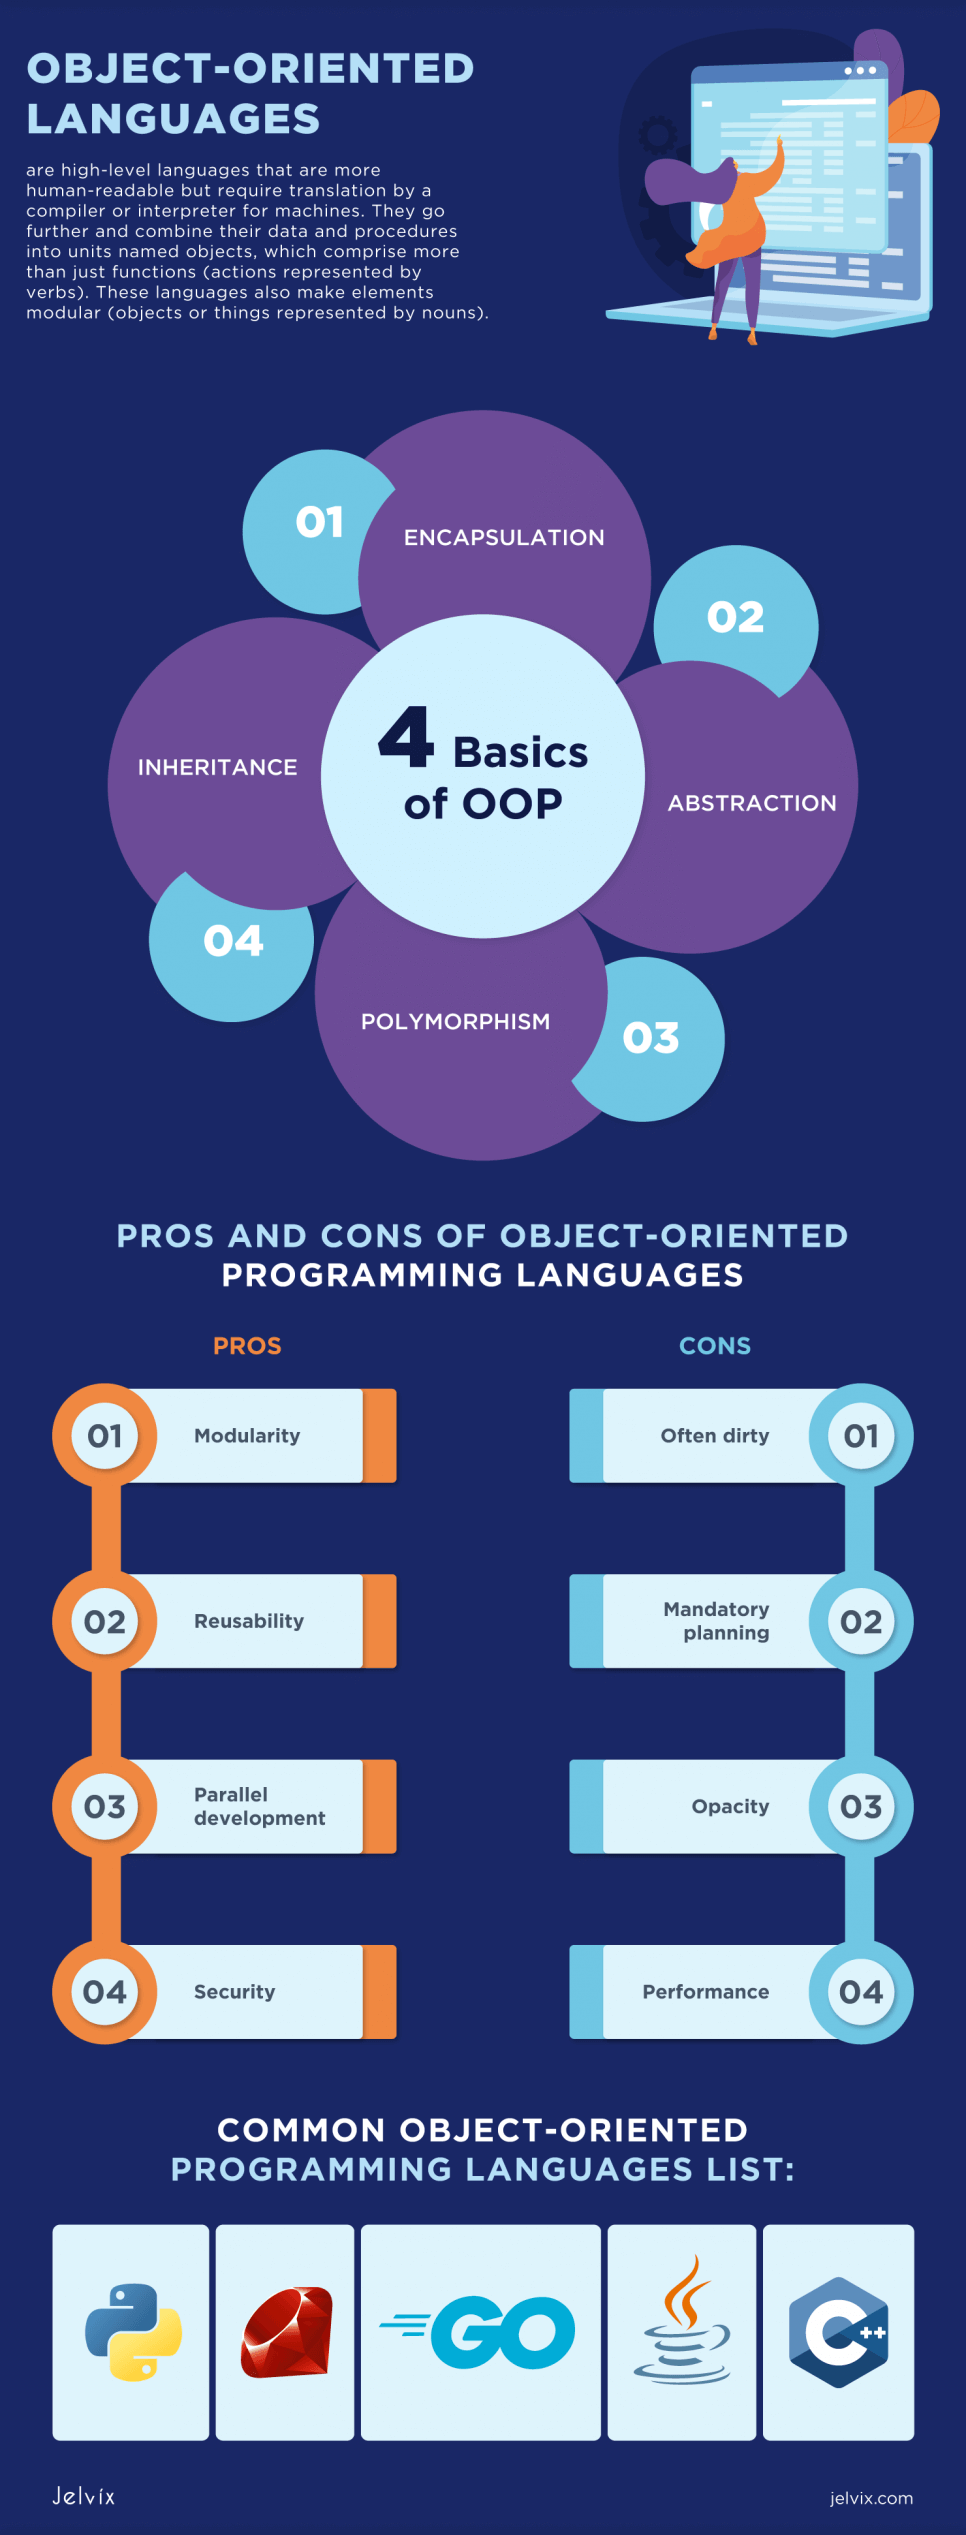 object-oriented programming languages